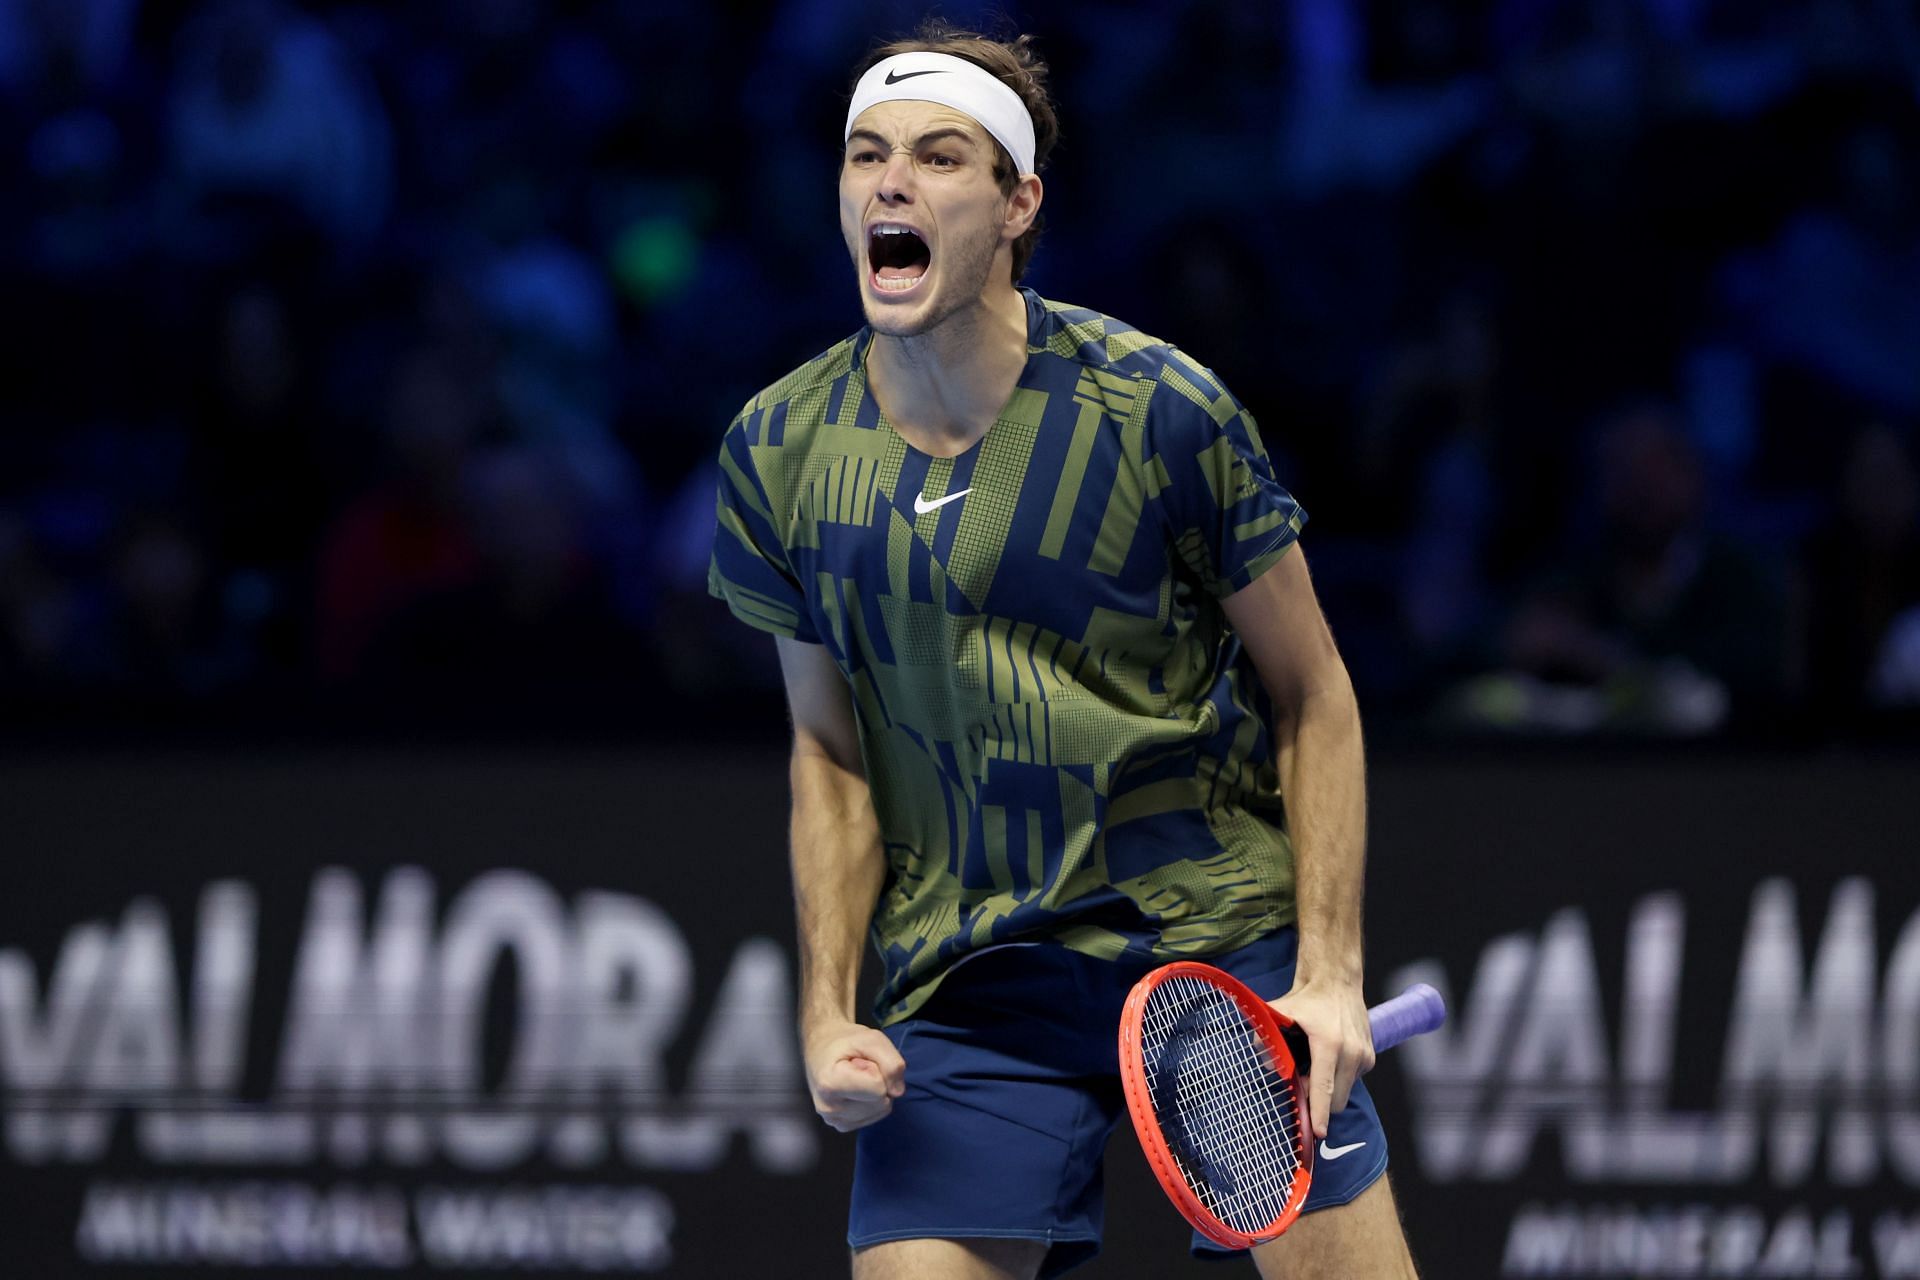 Taylor Fritz in action at the Nitto ATP Finals 2022